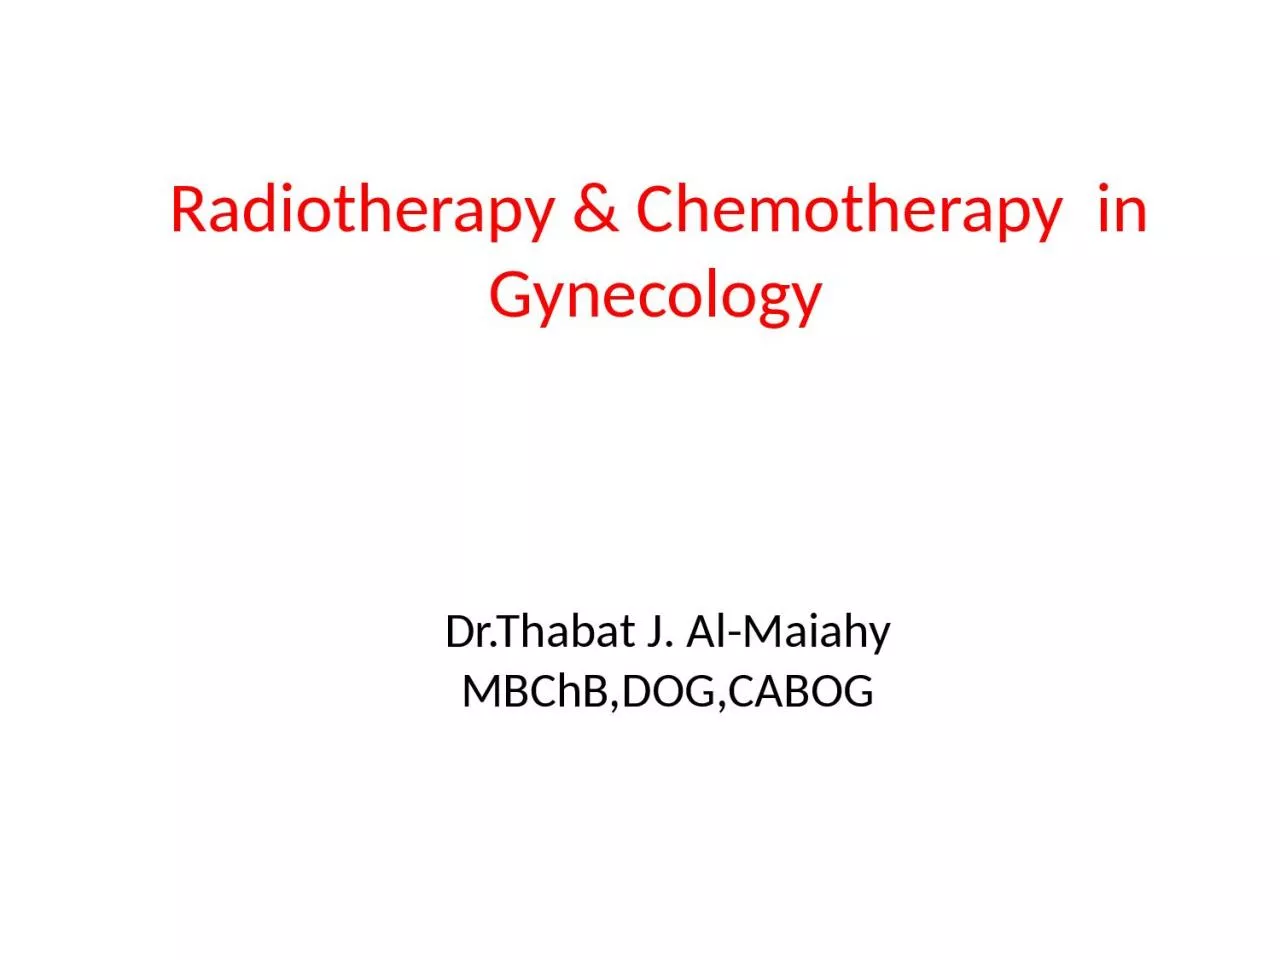 Radiotherapy & Chemotherapy  in Gynecology